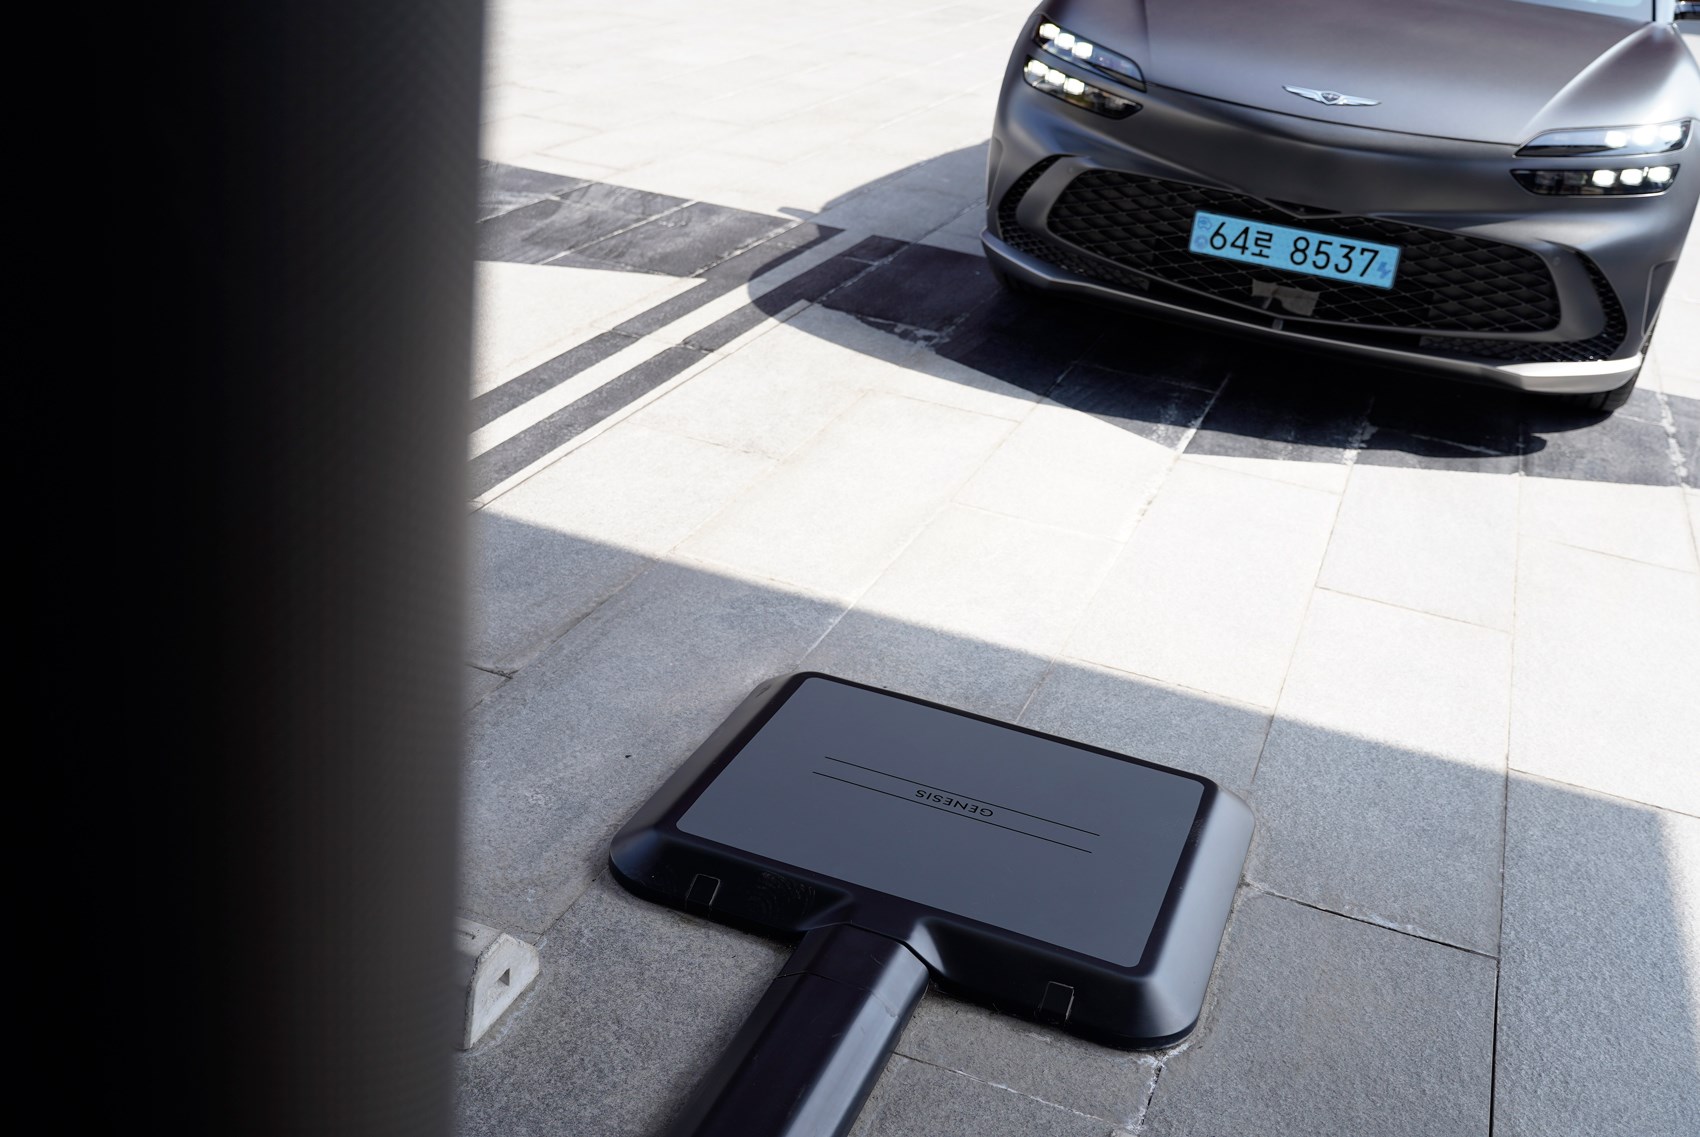 EV Charging 101: Charge, drive and live better